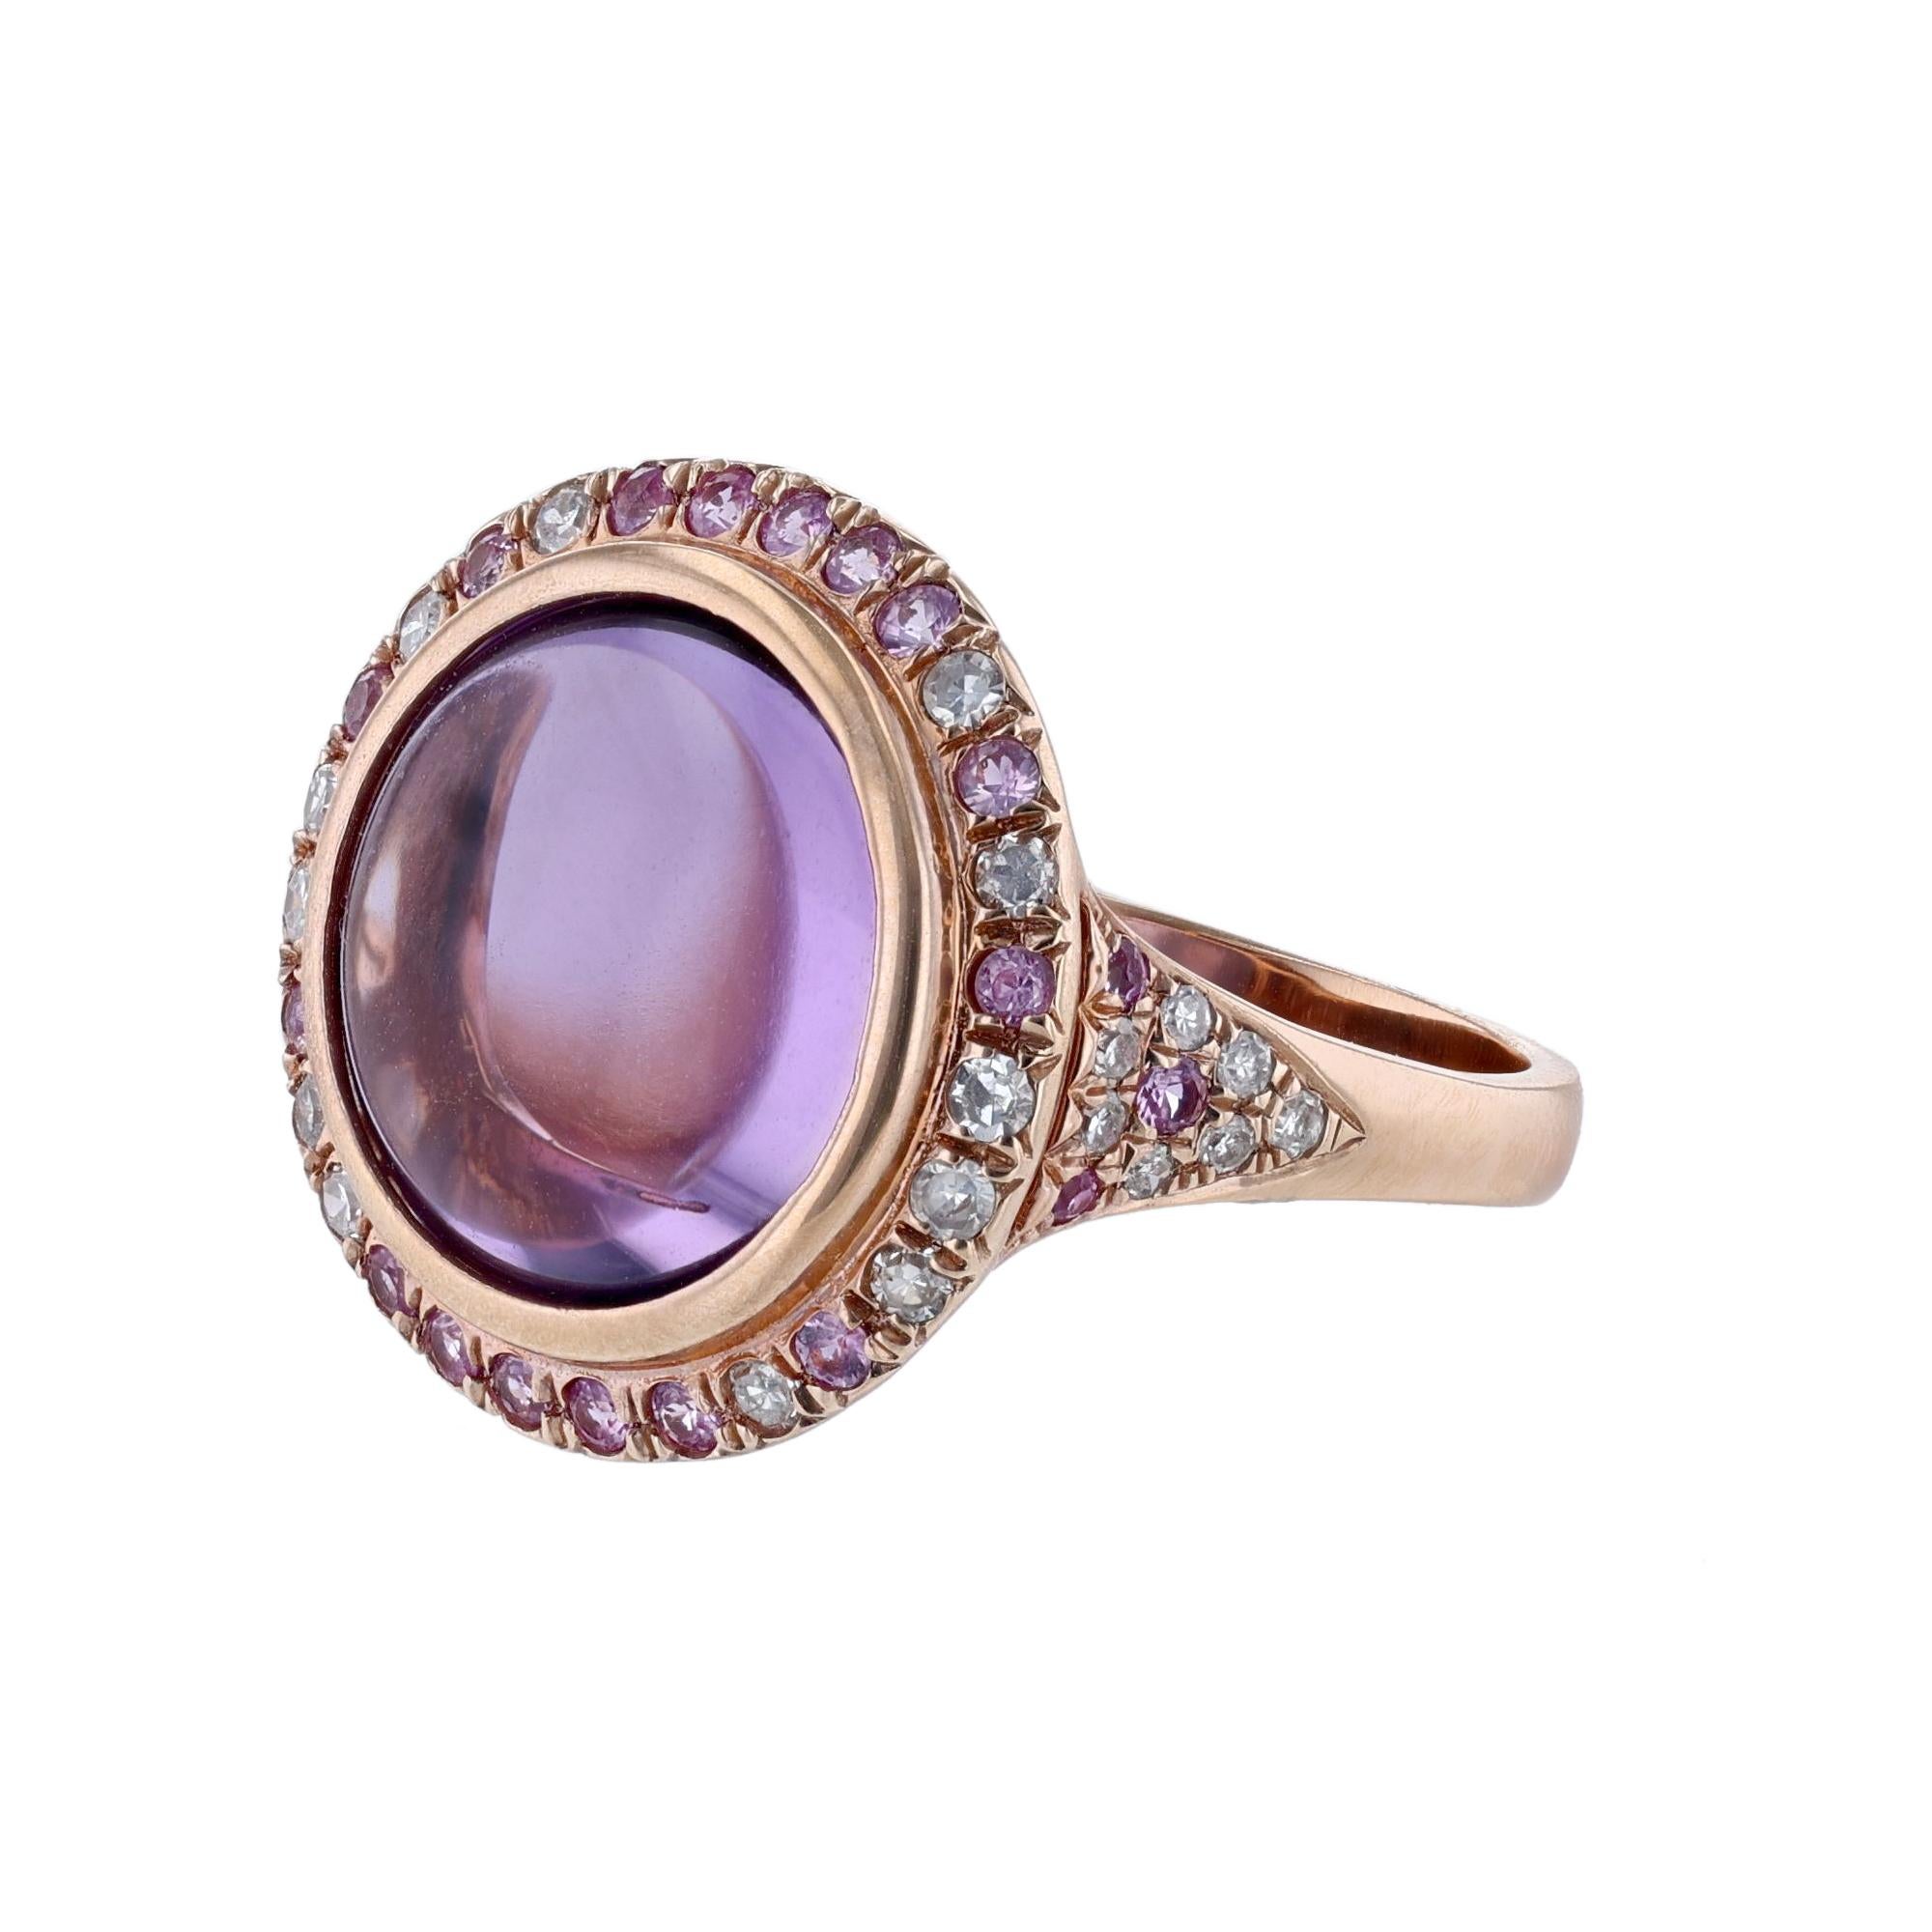 This ring is made in 14K rose gold and features 1 center round amethyst weighing 8.86 carats. Surrounded by a halo and shank of 22 pink sapphires weighing 0.34ct. and 26 diamonds weighing 0.29ct. 
